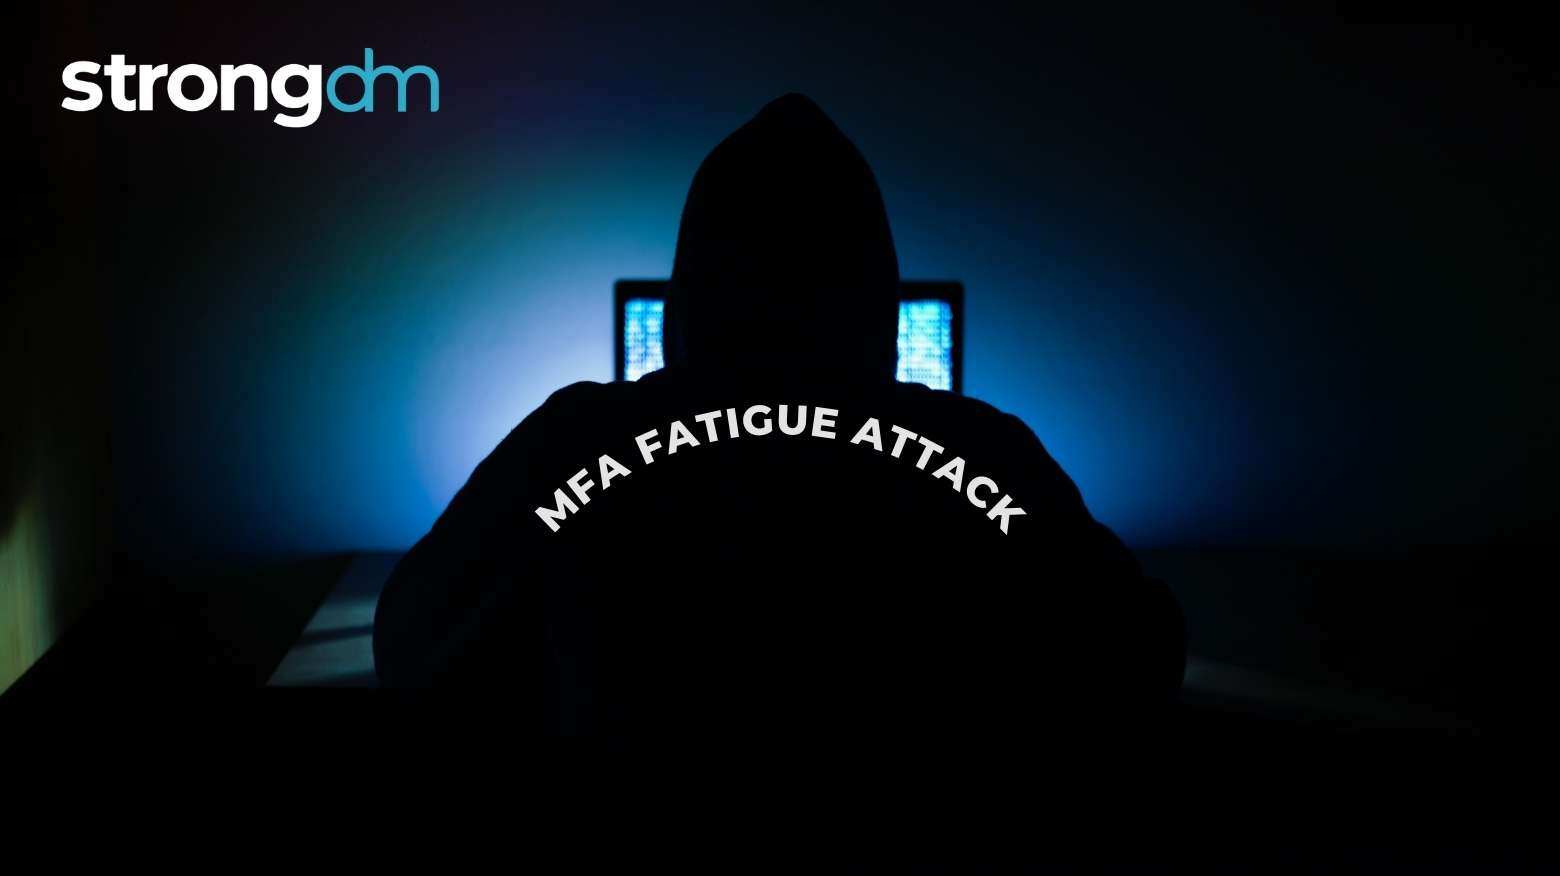 MFA Fatigue Attack: Meaning, Types, Examples, and More